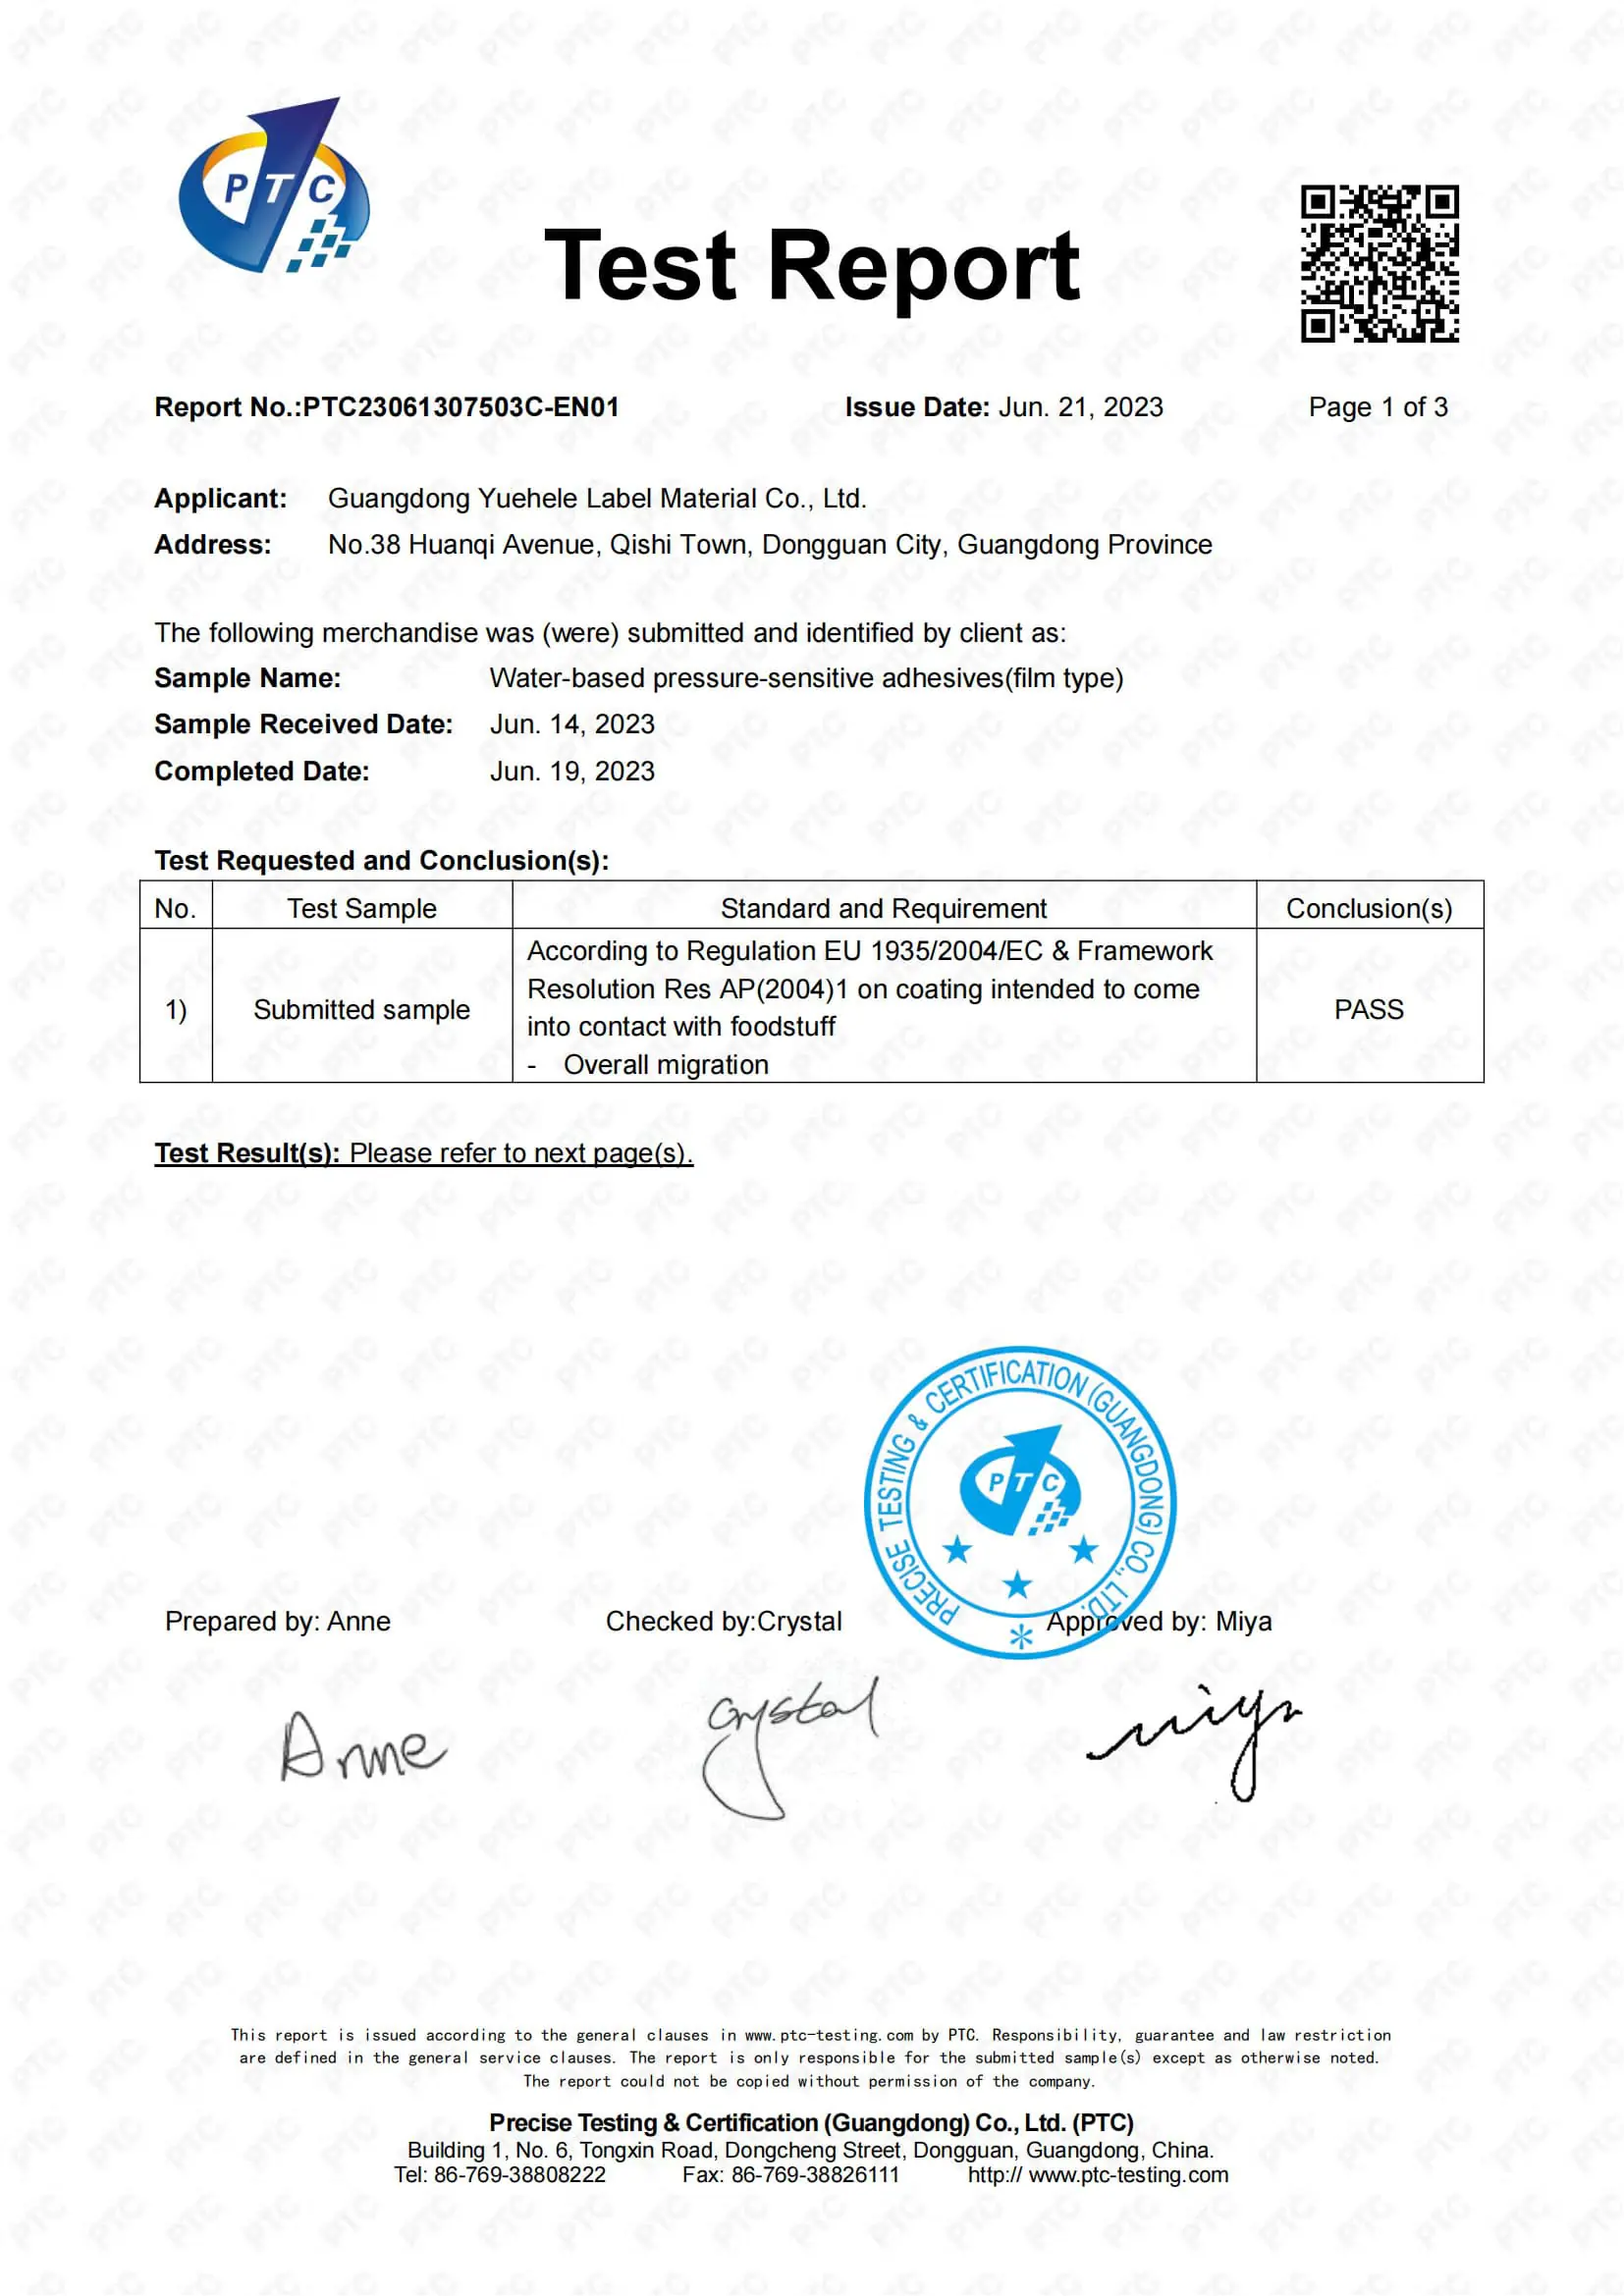 Product Certificate - label material-yuehele